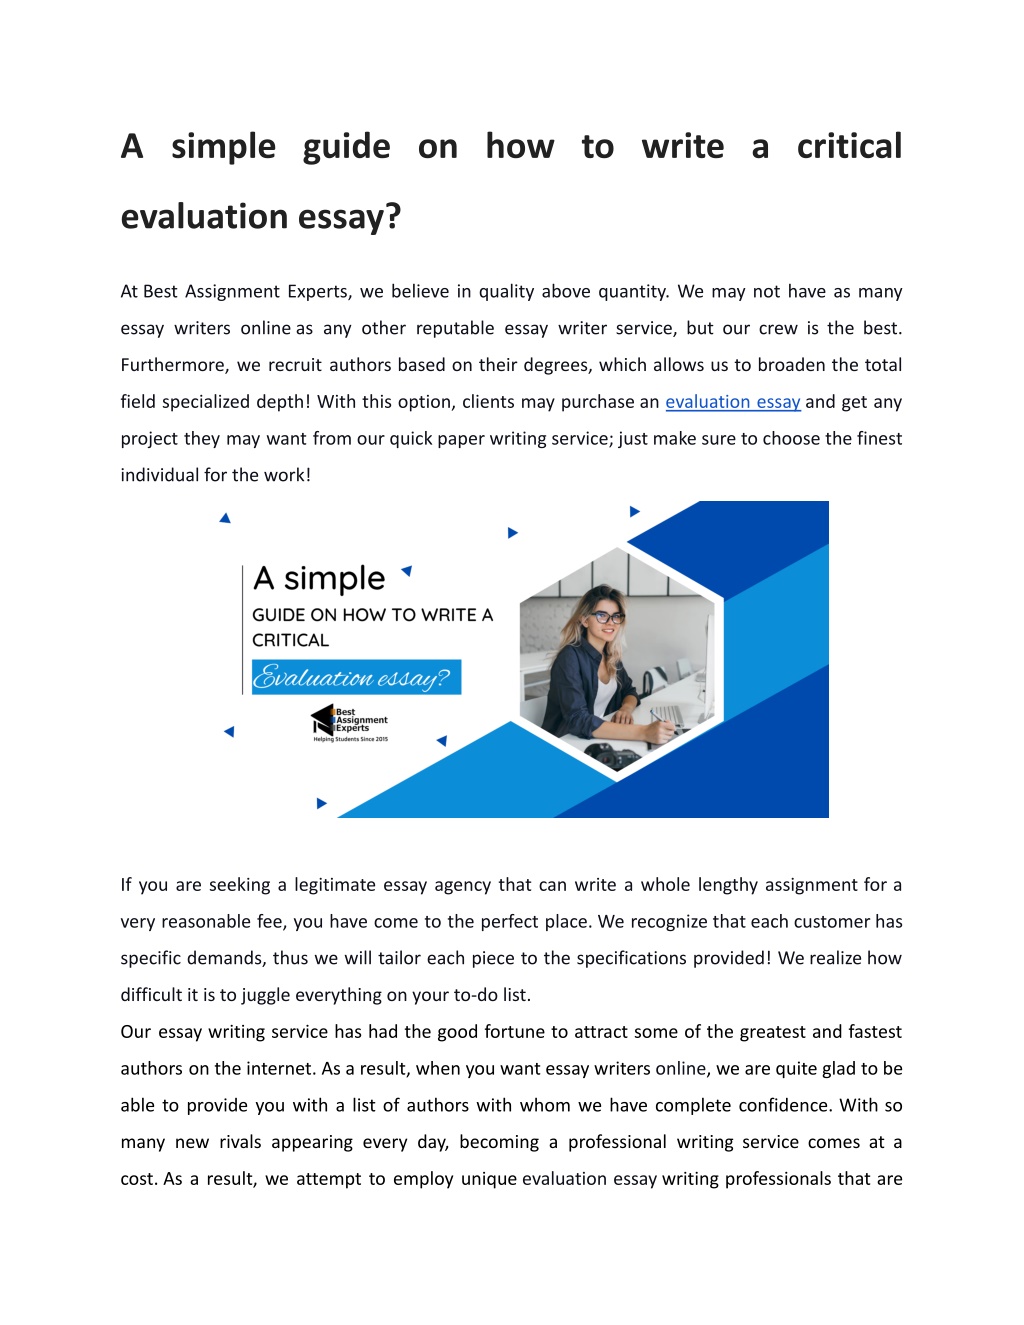 introduction to a critical evaluation essay